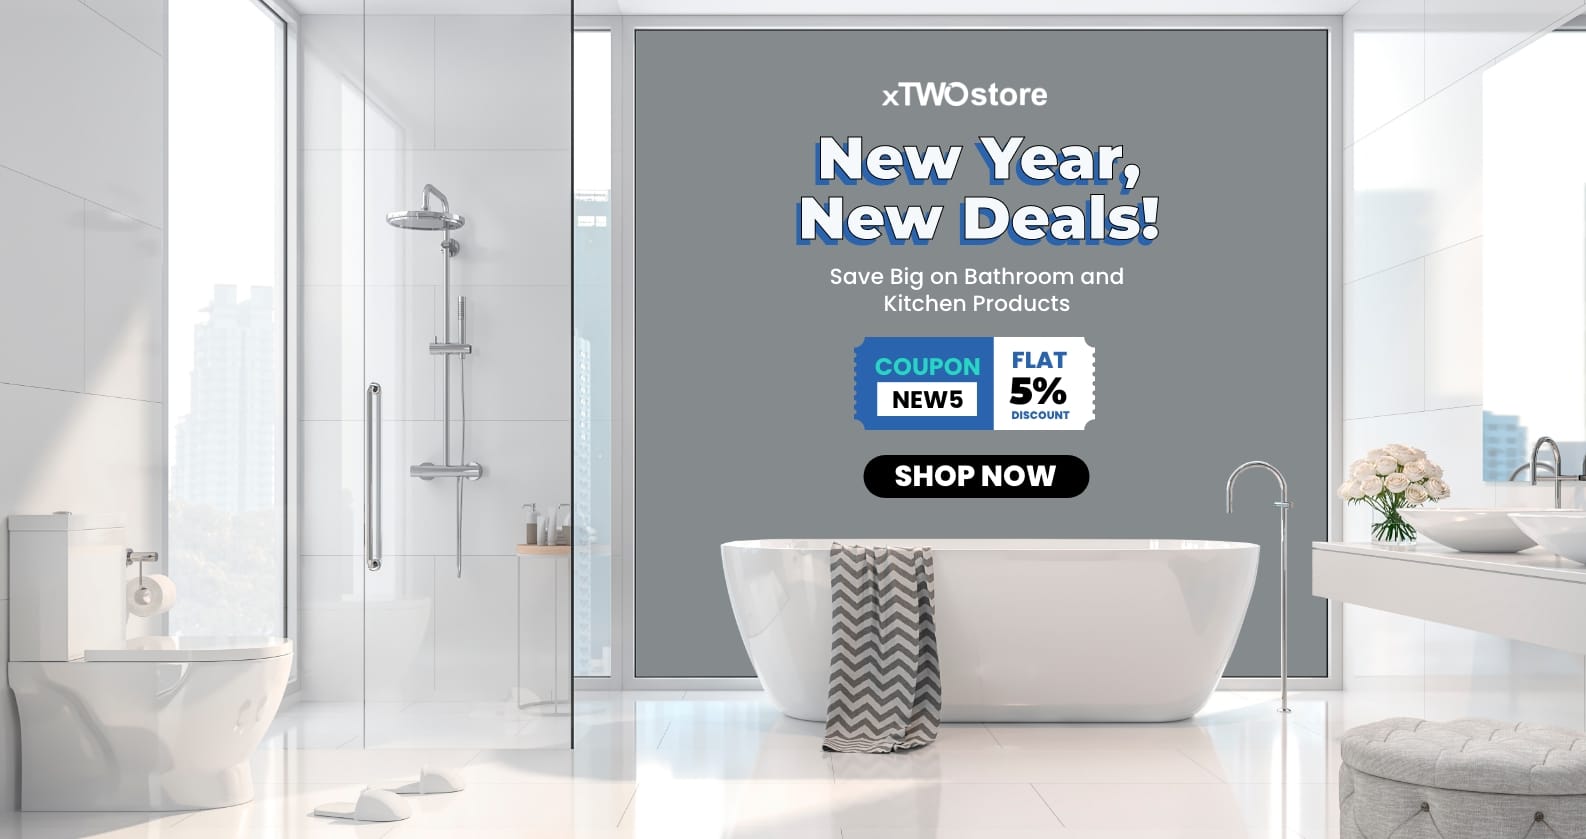  New Year New Deals at xTWO